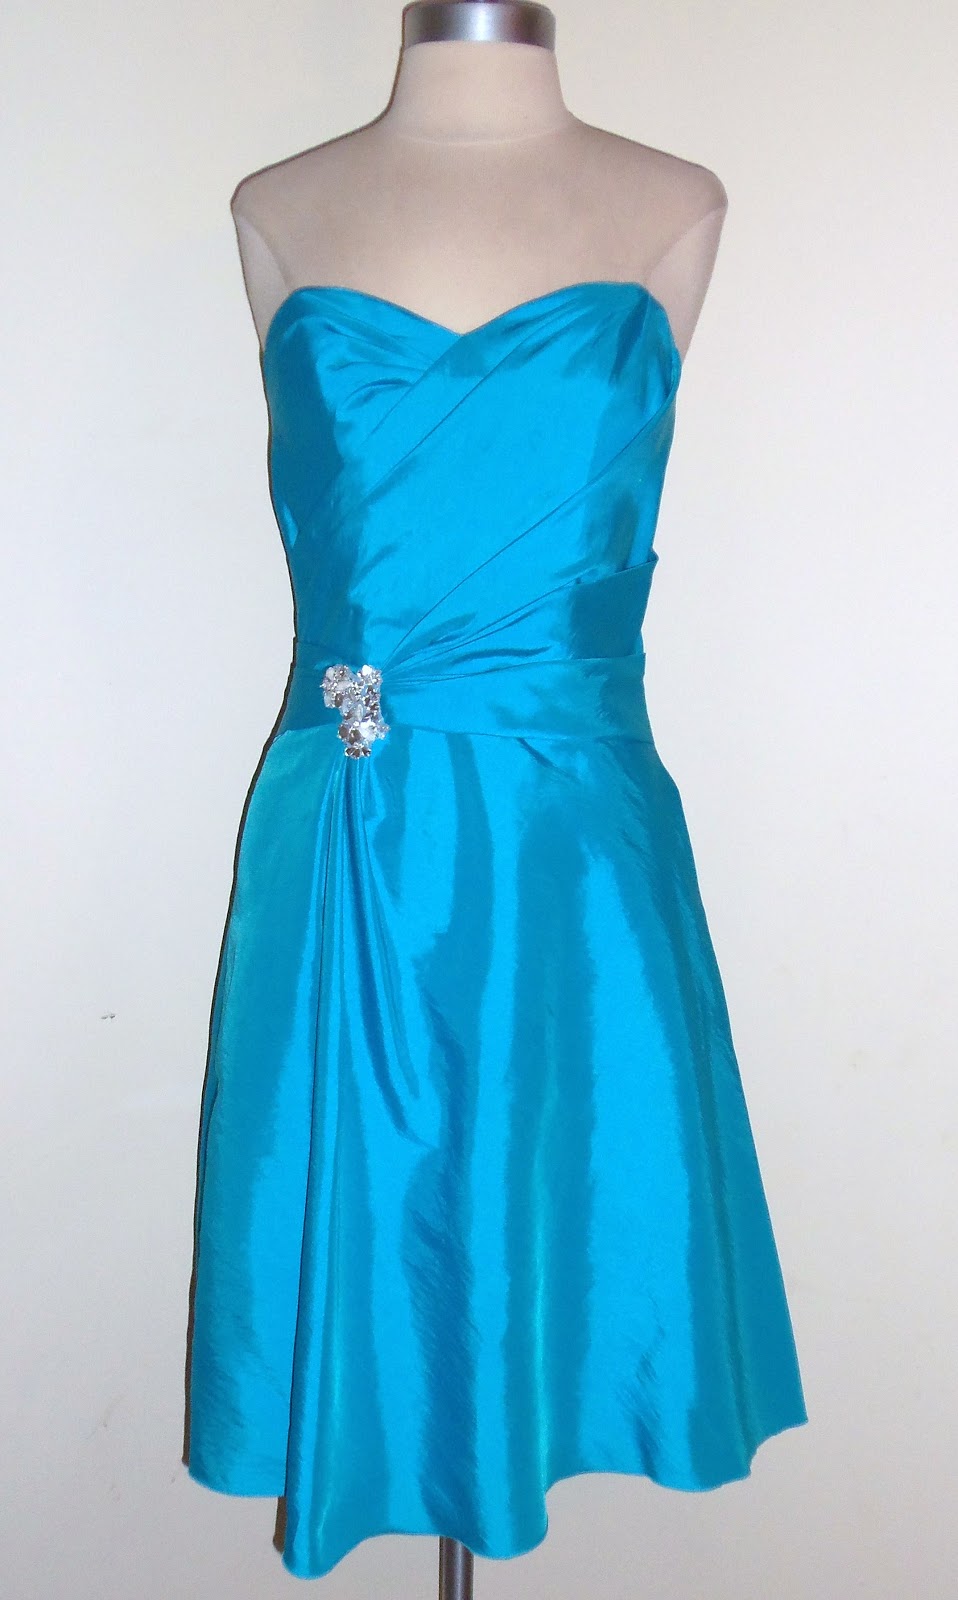 Thrifty Chic Shop: Non-Tradional Prom Dresses Vintage Style